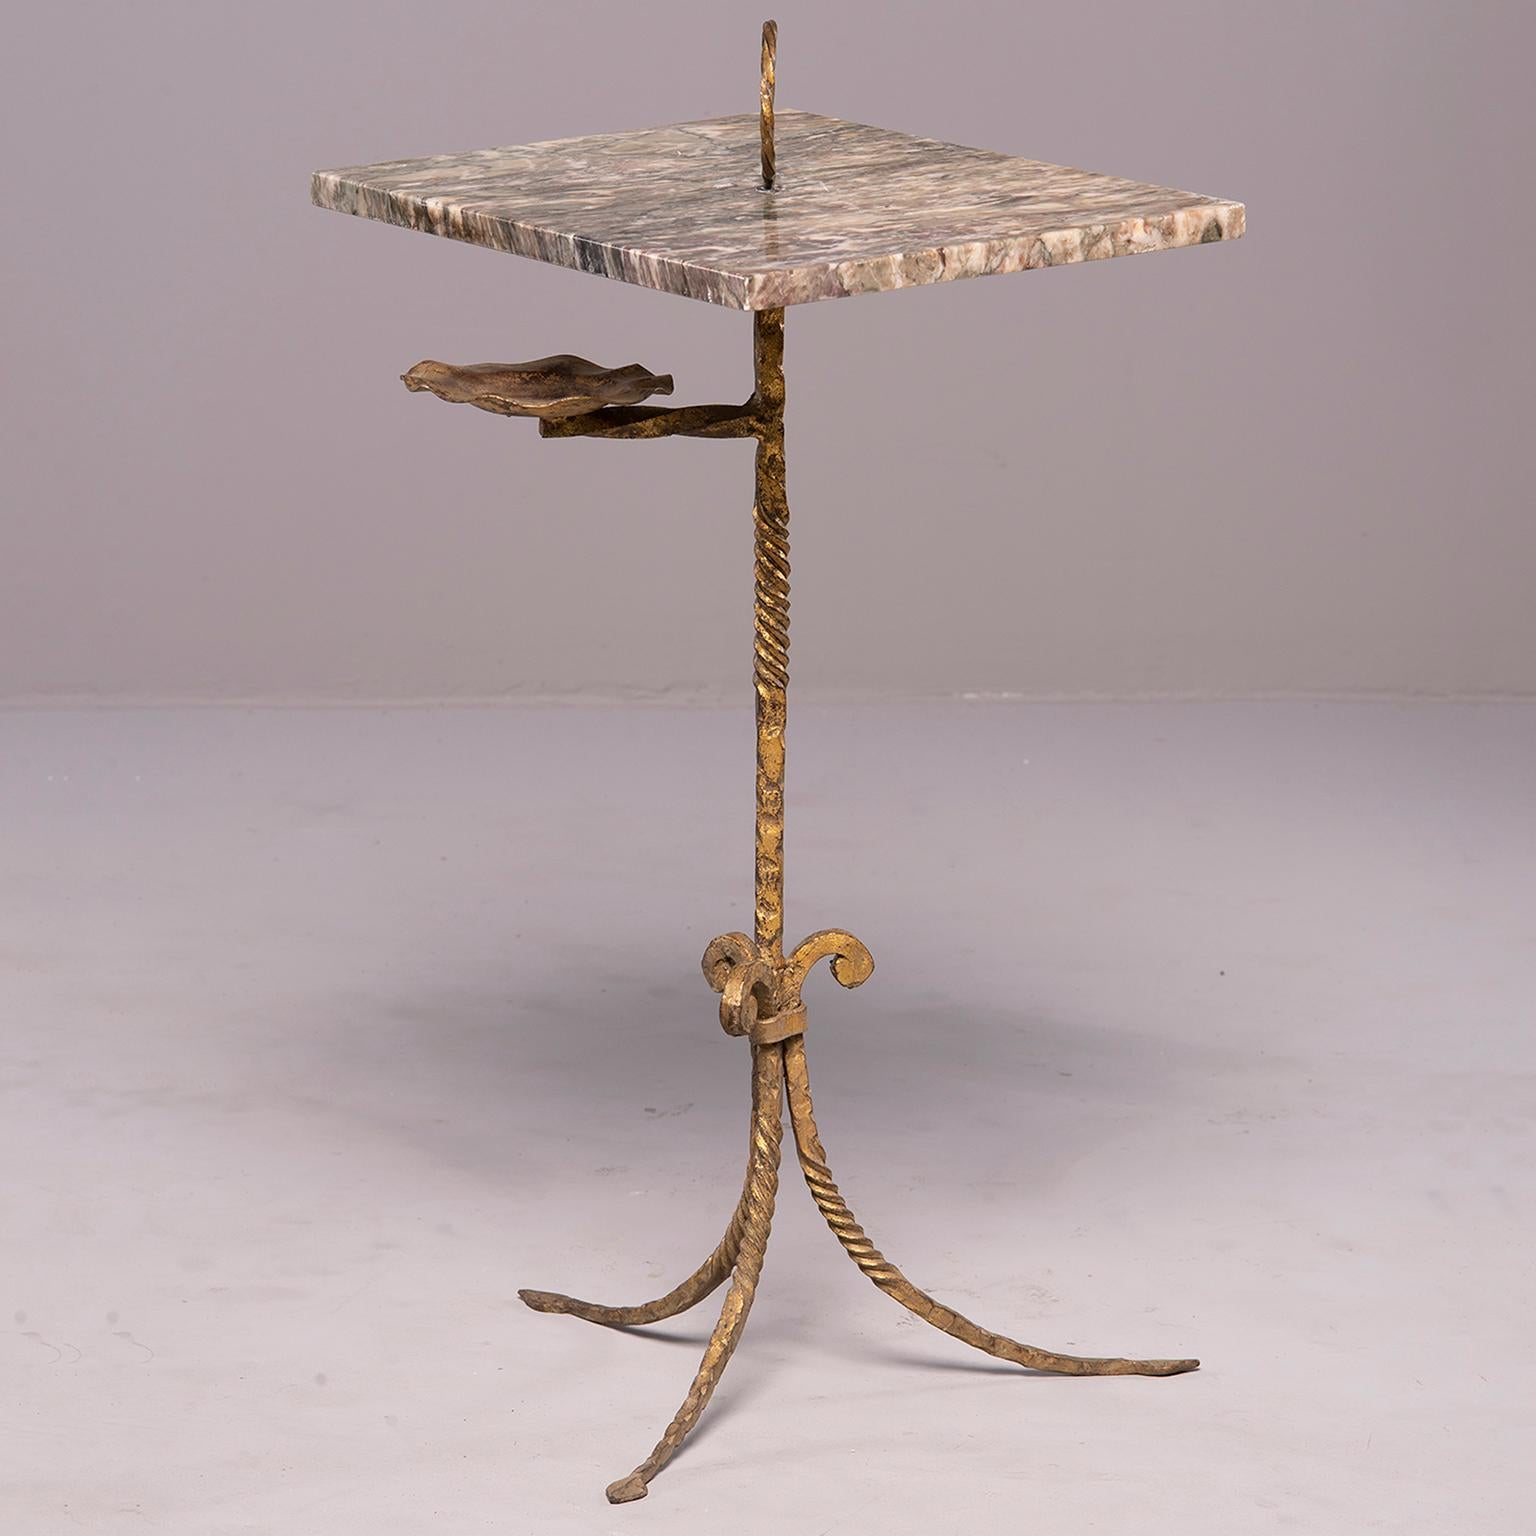 Spanish side table has an iron base with tripod feet, twisted surface details and gilded finish, circa 1930s. Rectangular marble top in gray tones with ring shaped topper and gilt metal ashtray holder below table. Unknown maker. Very good vintage